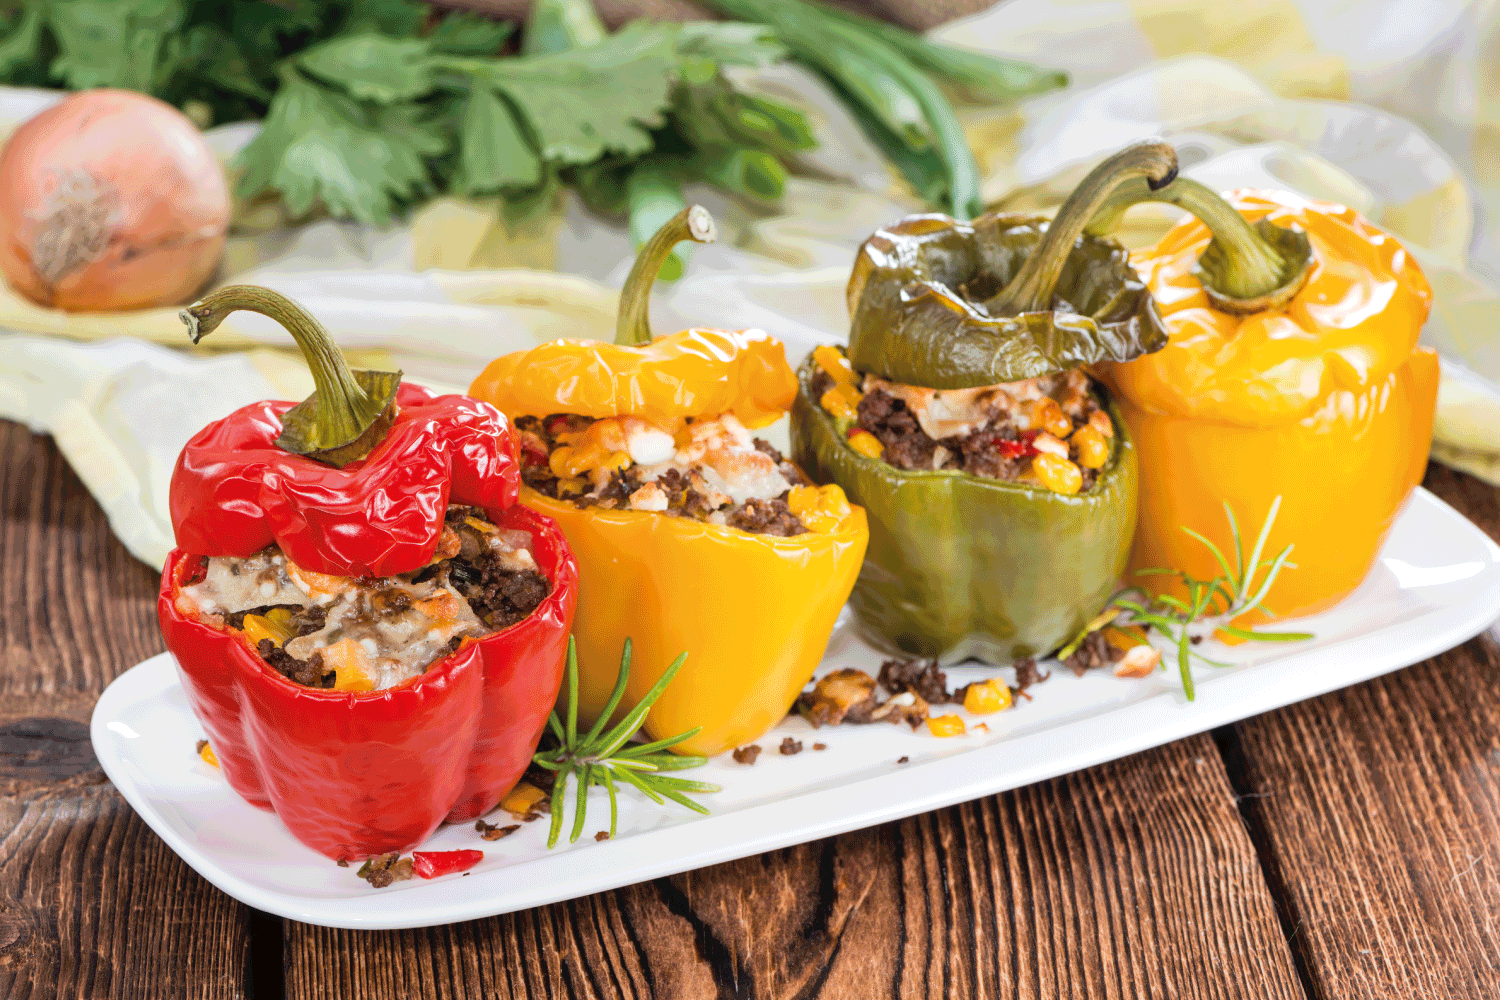 Stuffed Peppers with minced meat